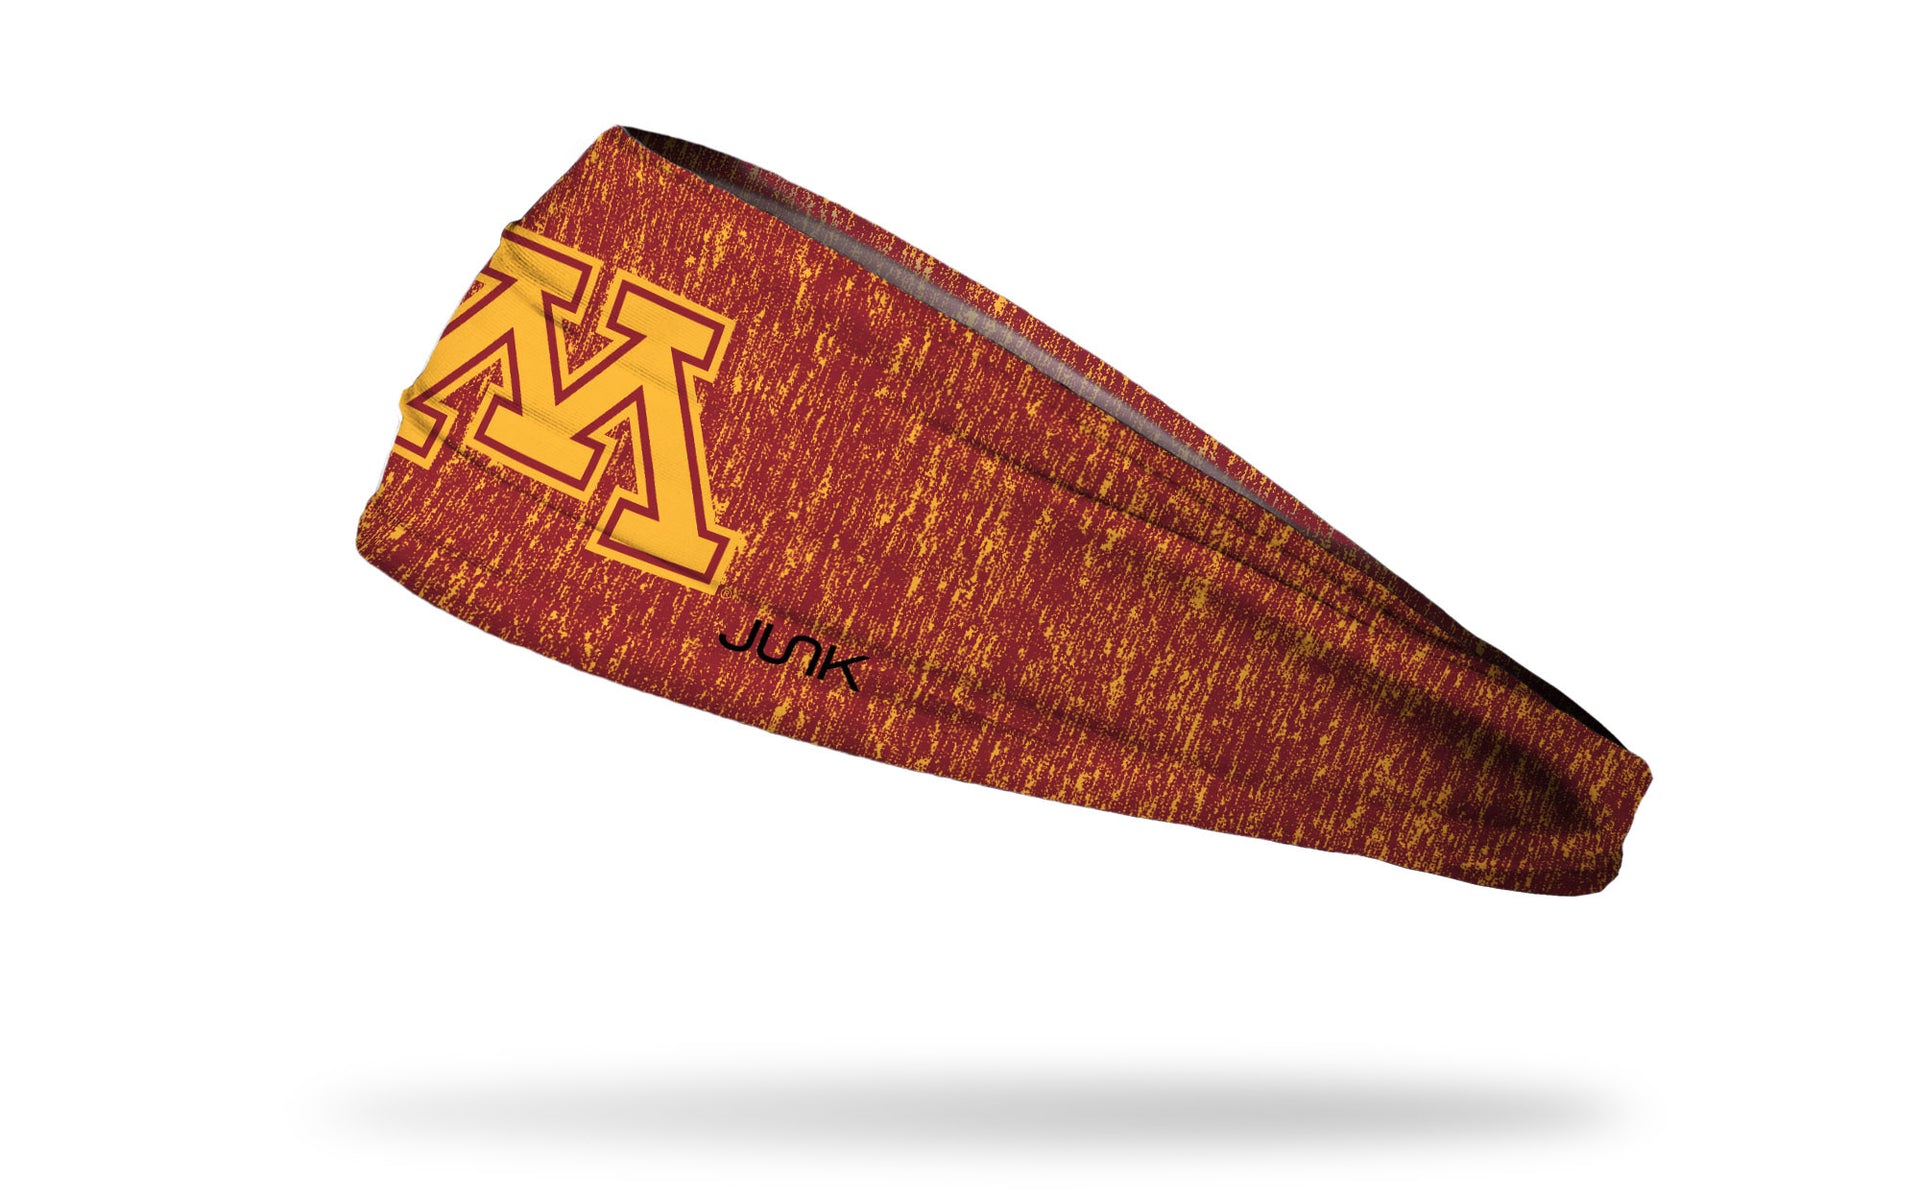 gold and maroon heathered headband with University of Minnesota M logo in gold